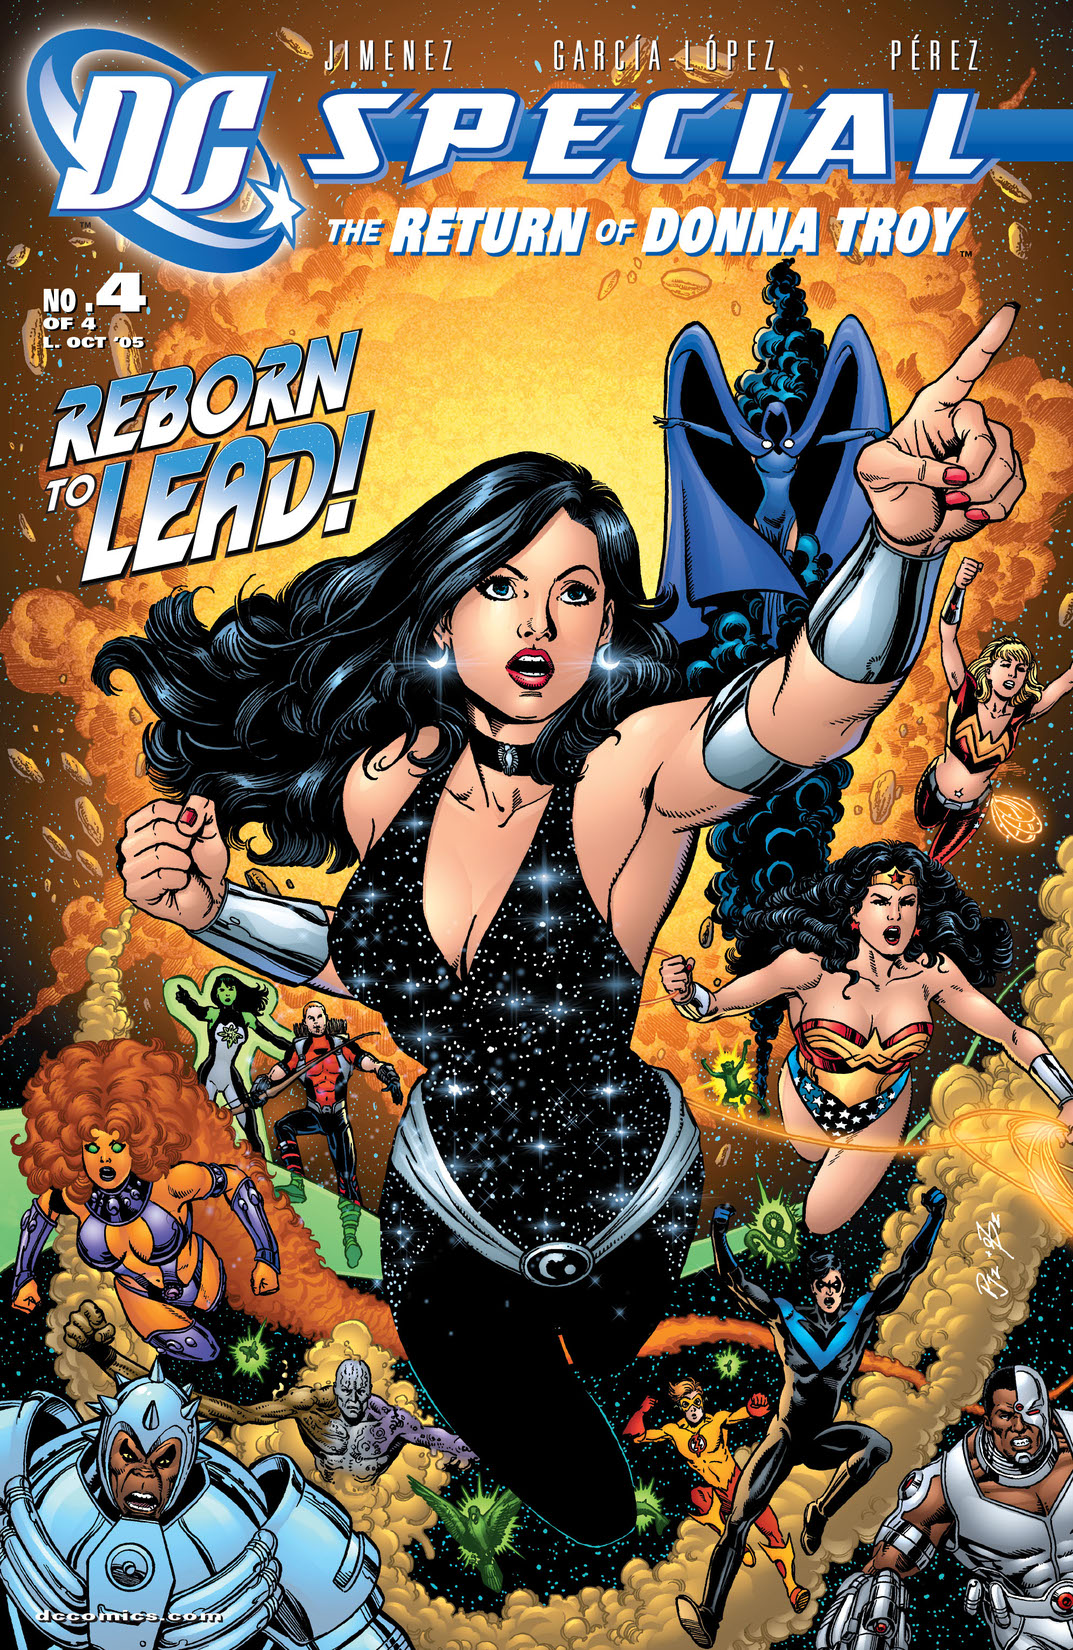 DC Special: The Return of Donna Troy #4 preview images